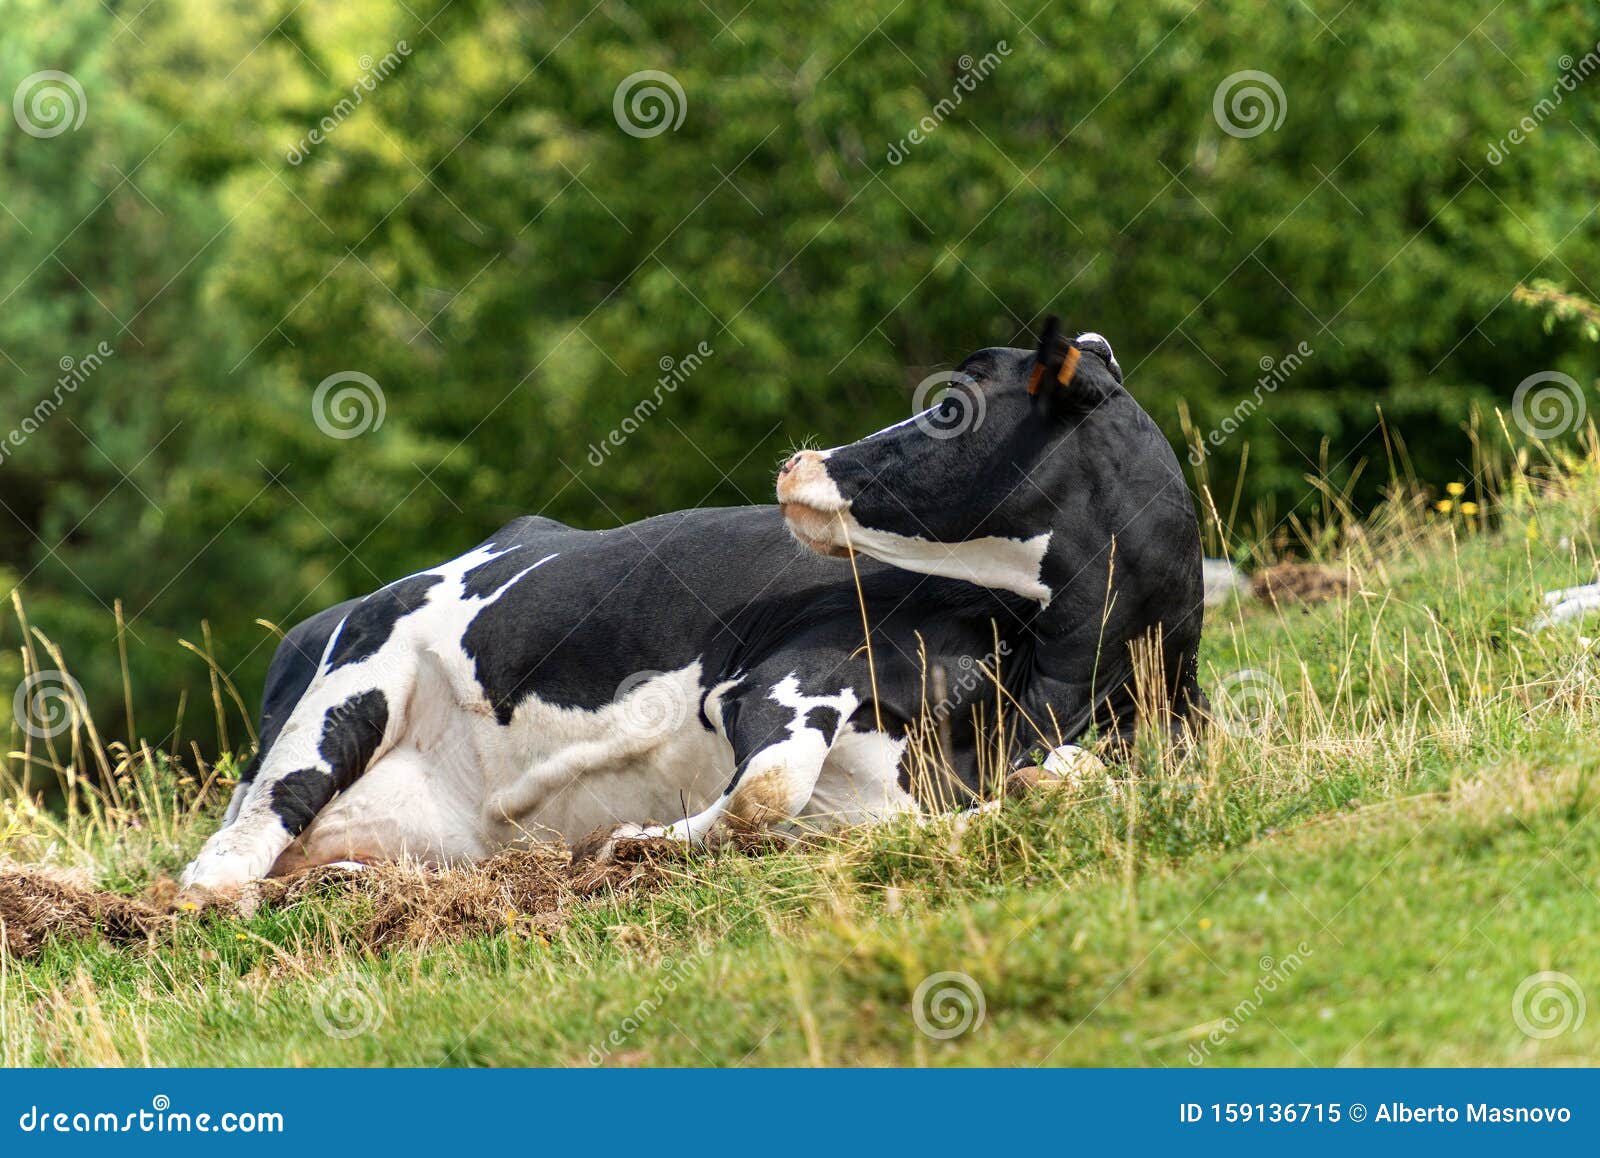 Dairy Cow Relaxing in the Grass - Italian Alps Stock Image - Image of ...